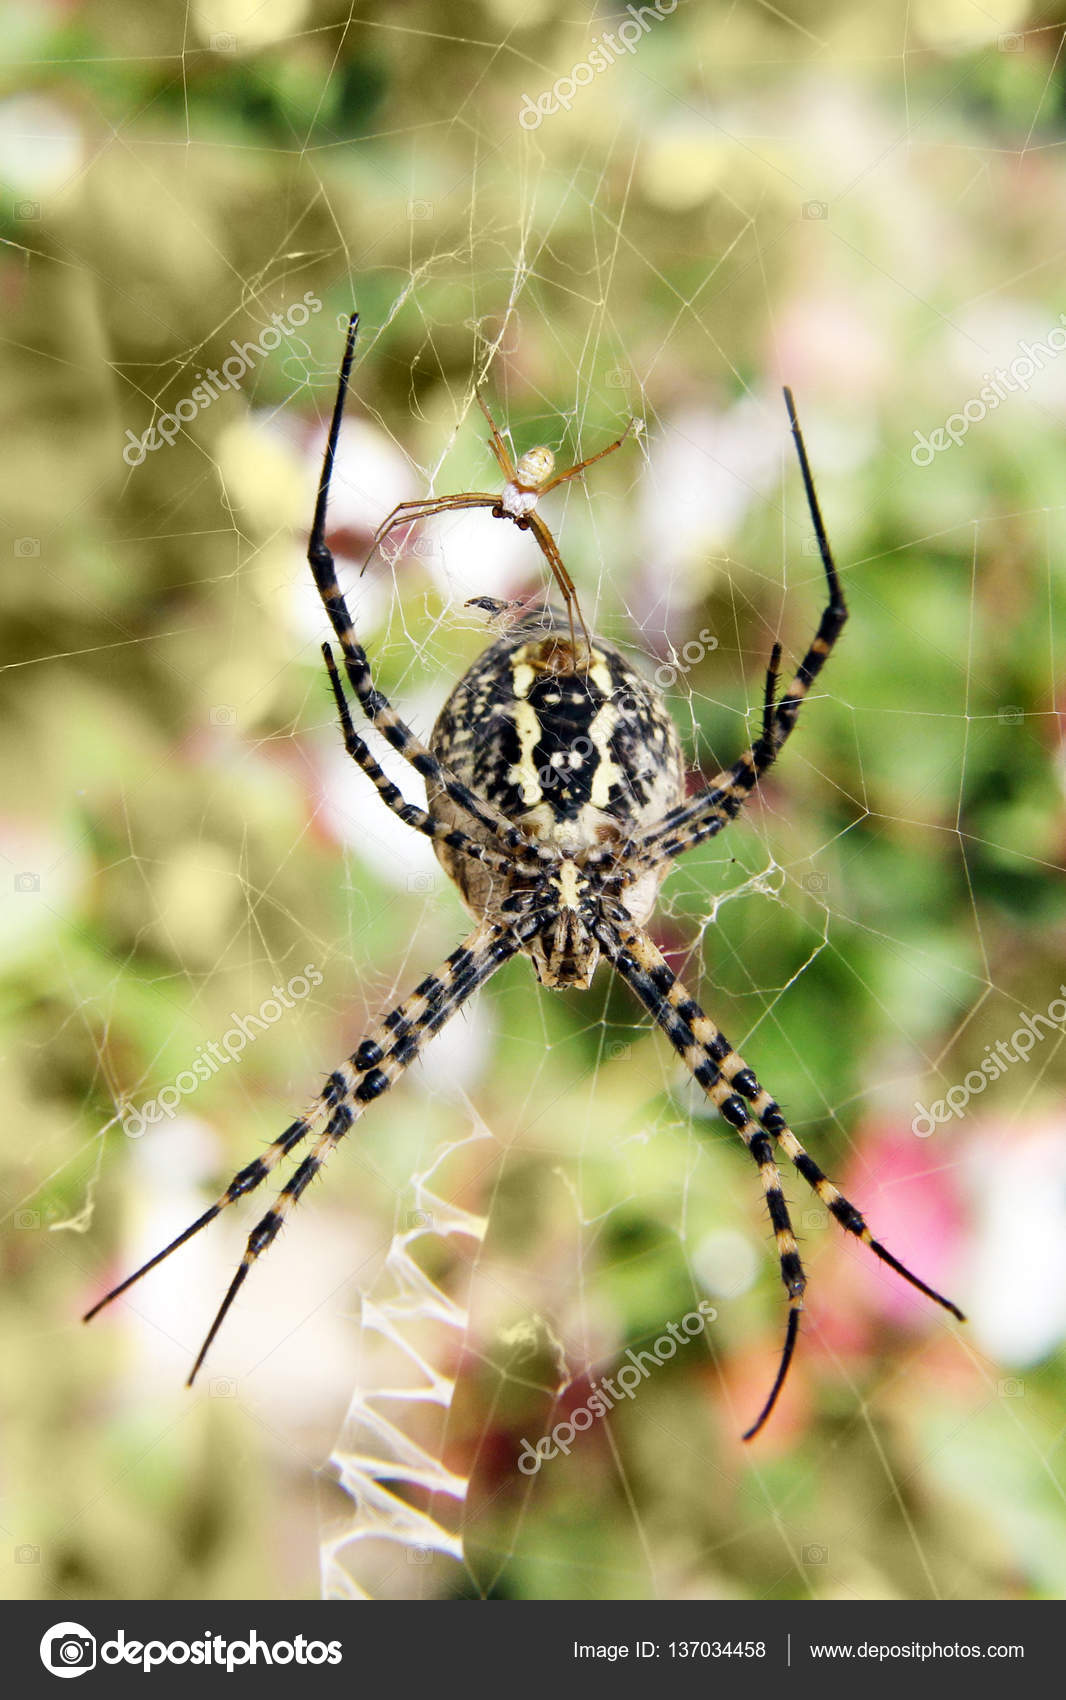 Male And Female Banded Garden Spider Spiders Stock Photo C Moh